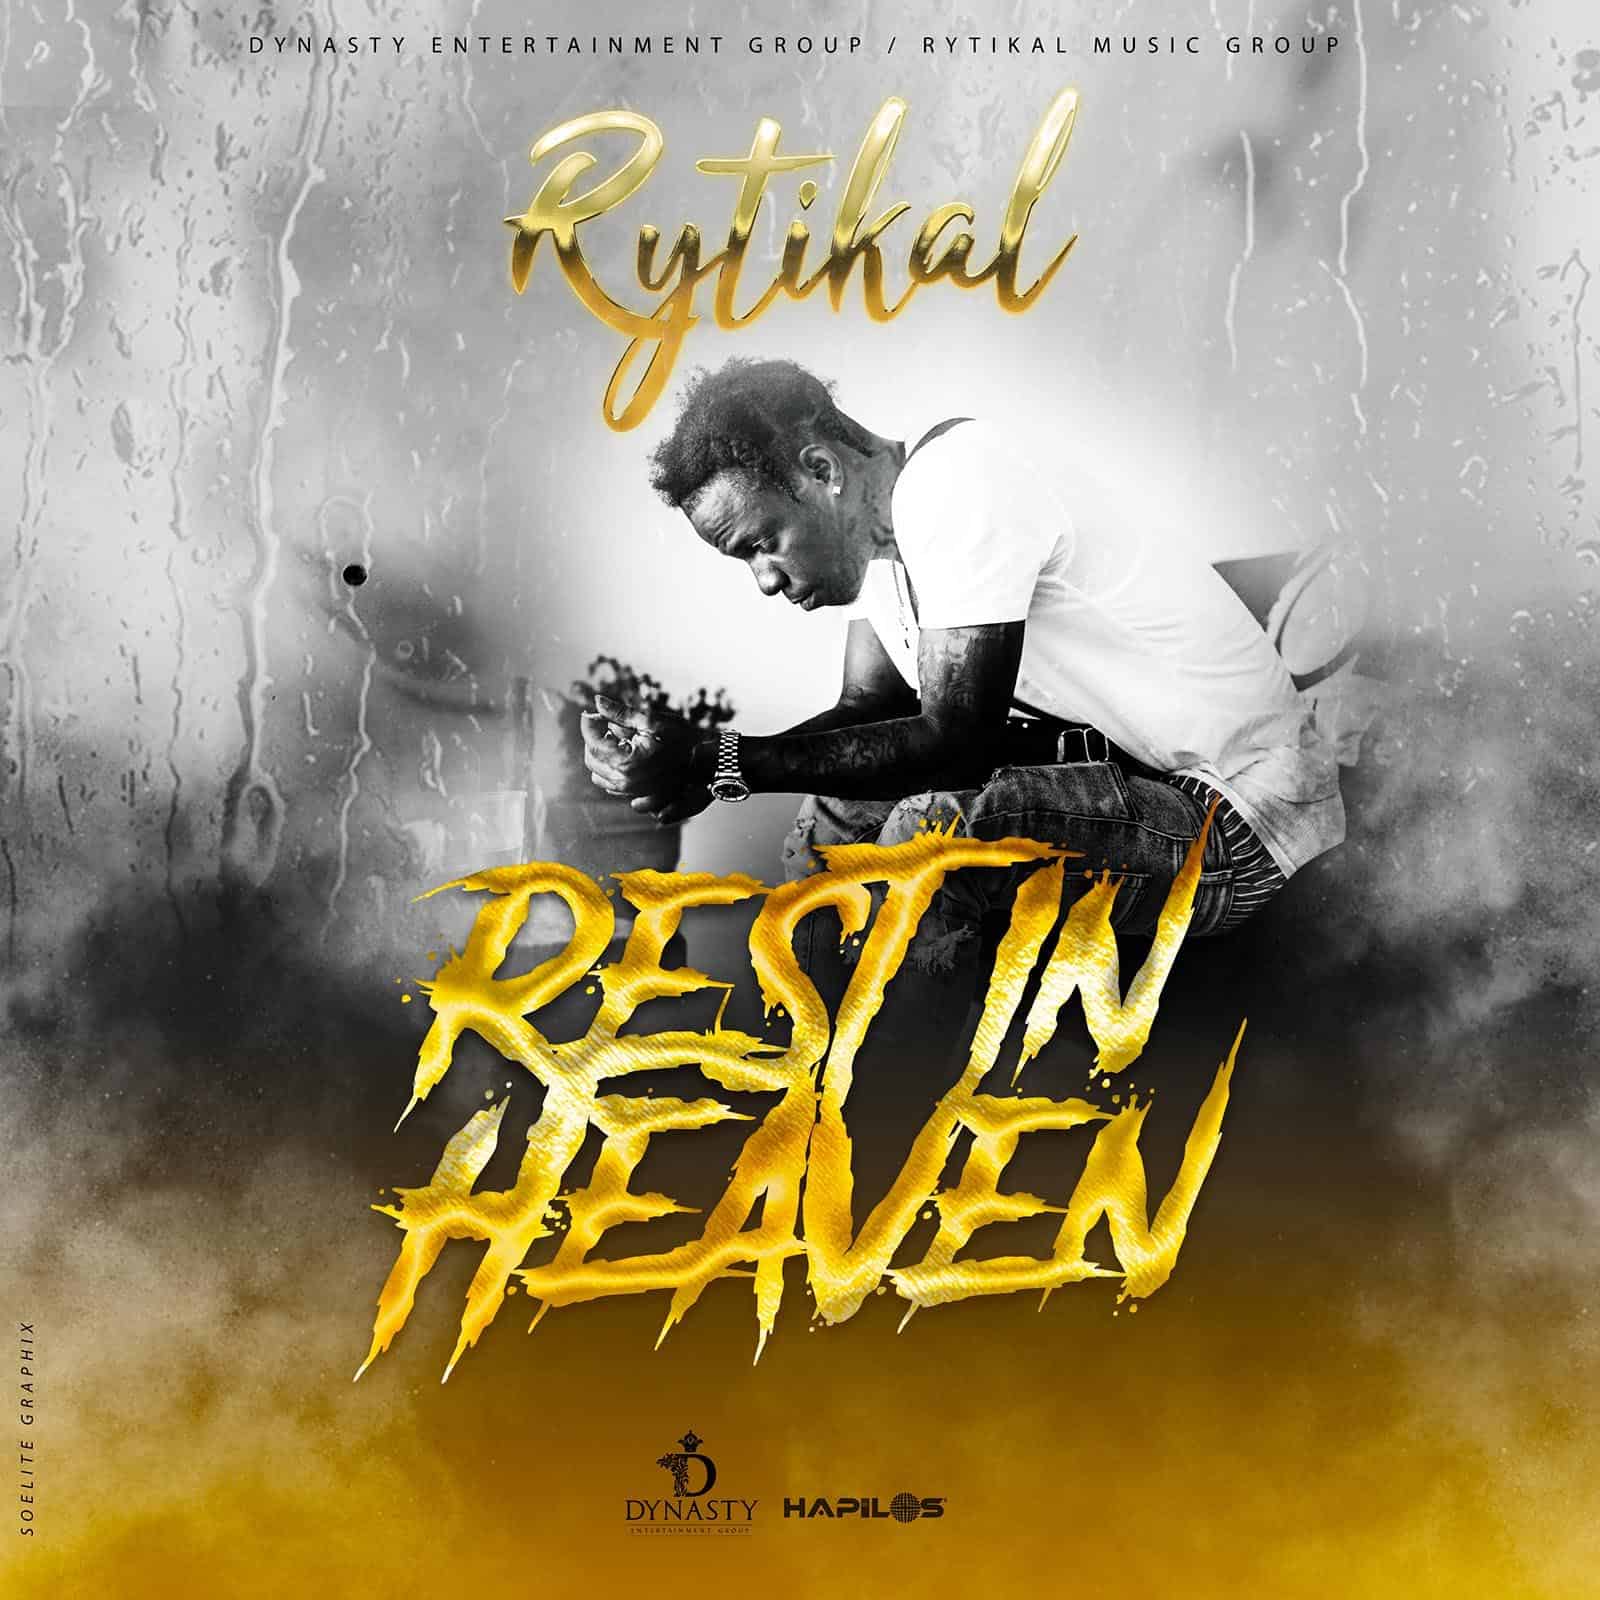 Rytikal - Rest In Heaven - Dynasty Entertainment Group